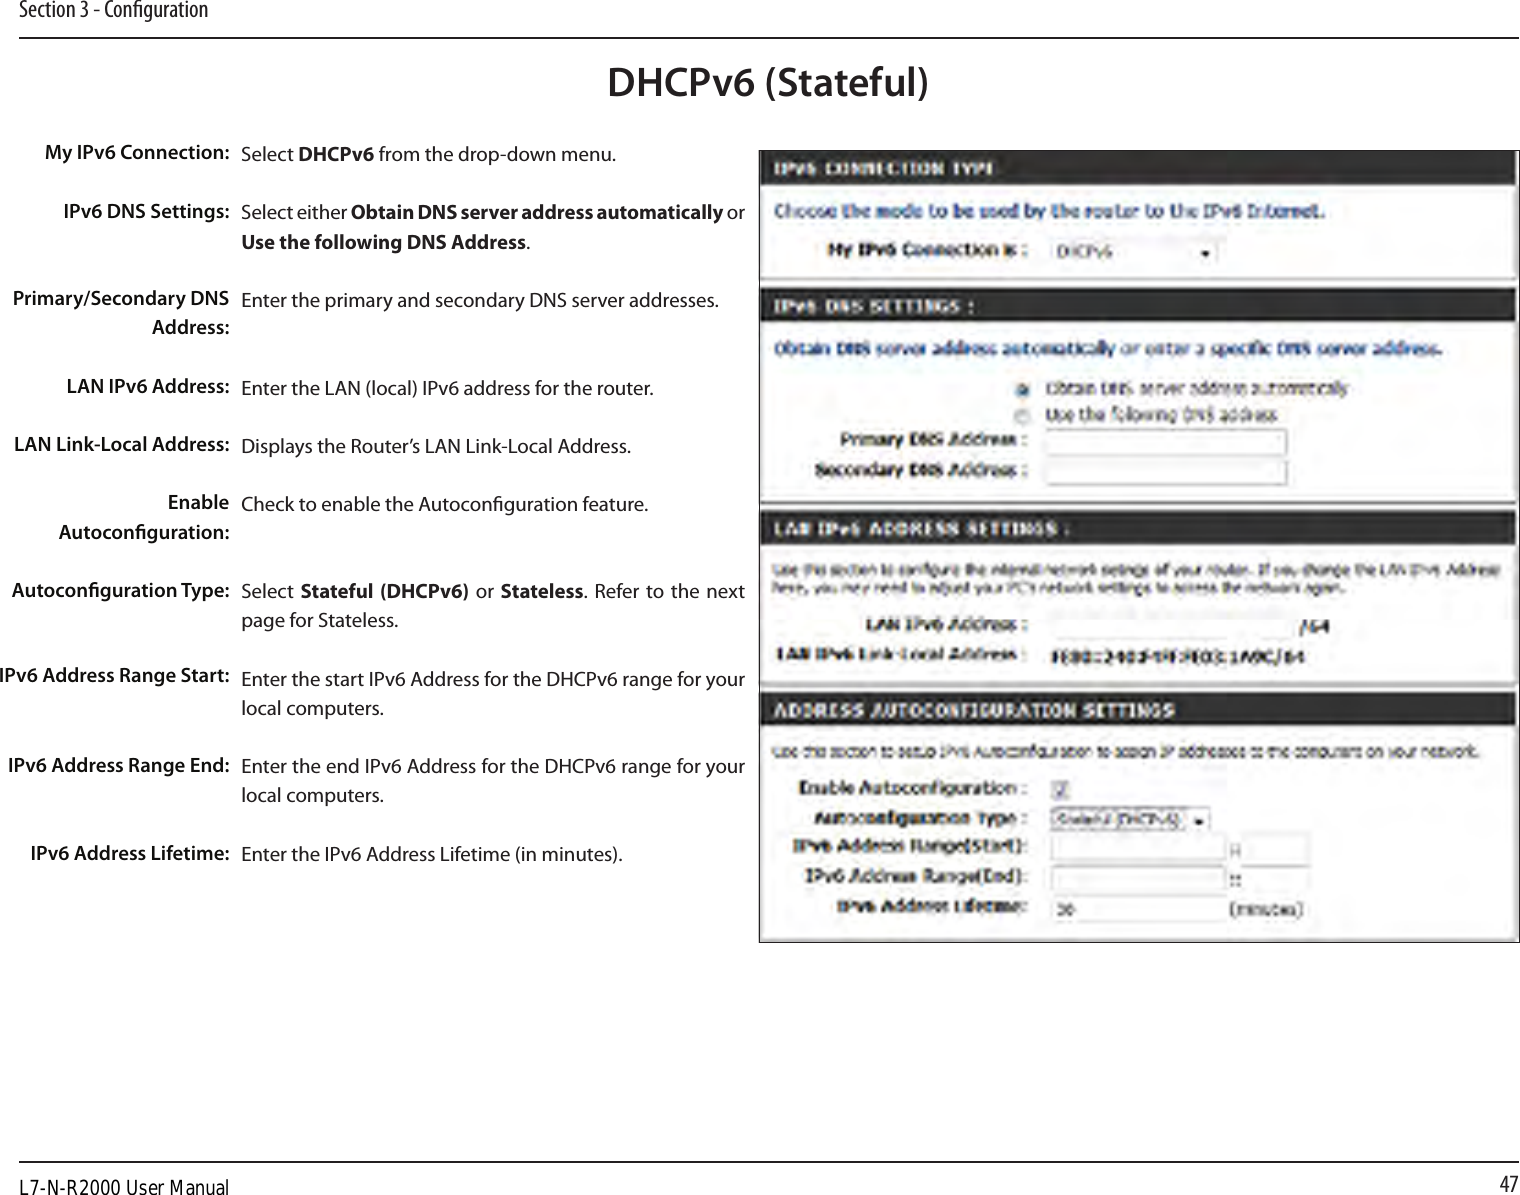 47Section 3 - CongurationDHCPv6 (Stateful)Select DHCPv6 from the drop-down menu.Select either Obtain DNS server address automatically or Use the following DNS Address.Enter the primary and secondary DNS server addresses. Enter the LAN (local) IPv6 address for the router. Displays the Router’s LAN Link-Local Address.Check to enable the Autoconguration feature.Select  Stateful (DHCPv6)  or Stateless. Refer to the next page for Stateless.Enter the start IPv6 Address for the DHCPv6 range for your local computers.Enter the end IPv6 Address for the DHCPv6 range for your local computers.Enter the IPv6 Address Lifetime (in minutes).My IPv6 Connection:IPv6 DNS Settings:Primary/Secondary DNS Address:LAN IPv6 Address:LAN Link-Local Address:Enable Autoconguration:Autoconguration Type:IPv6 Address Range Start:IPv6 Address Range End:IPv6 Address Lifetime:L7-N-R2000 User Manual